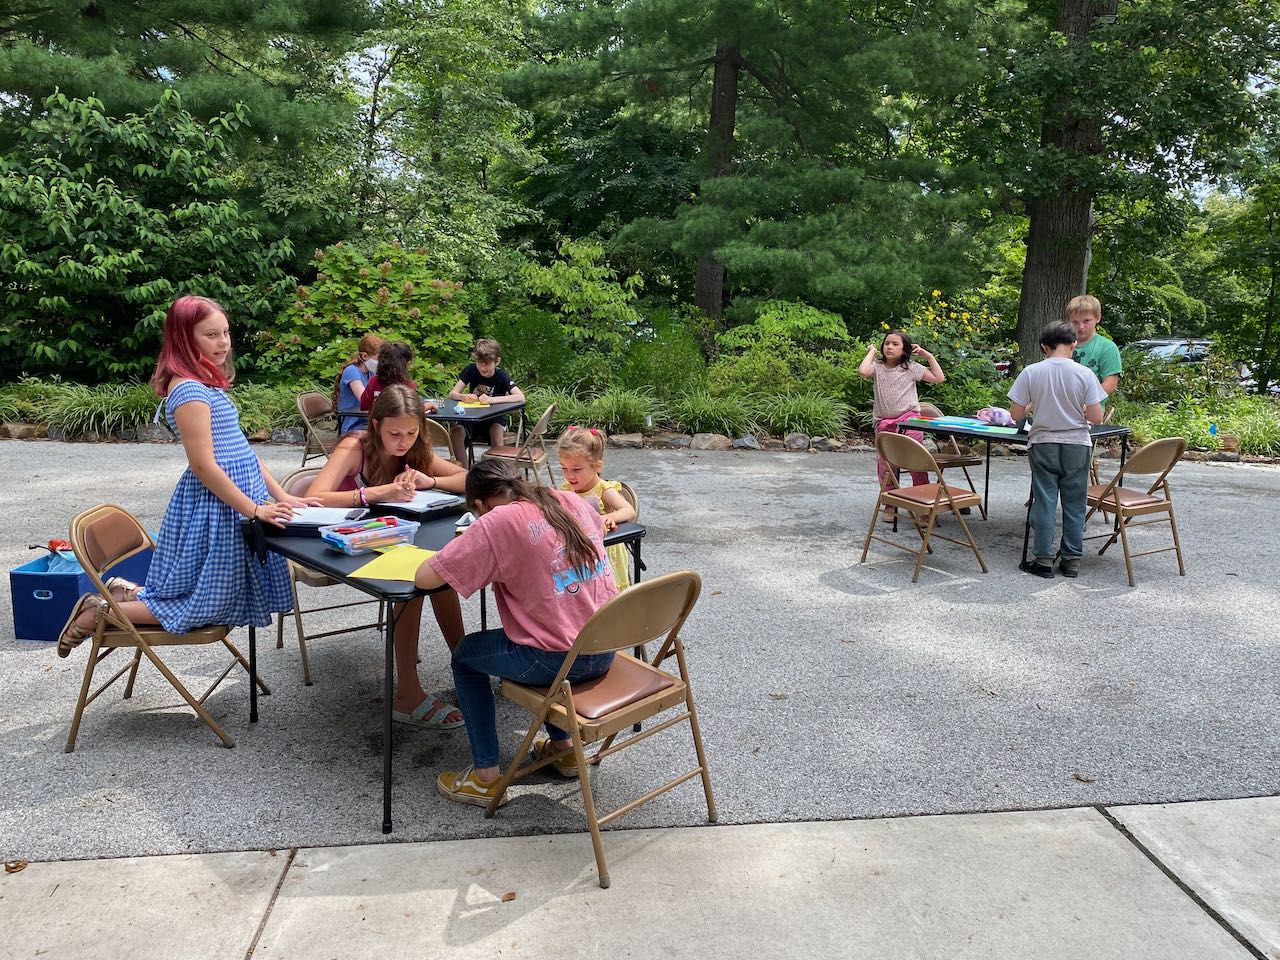 Children of a variety of ages, genders, and racial backgrounds seated around small tables outdoors participating in faith development activities